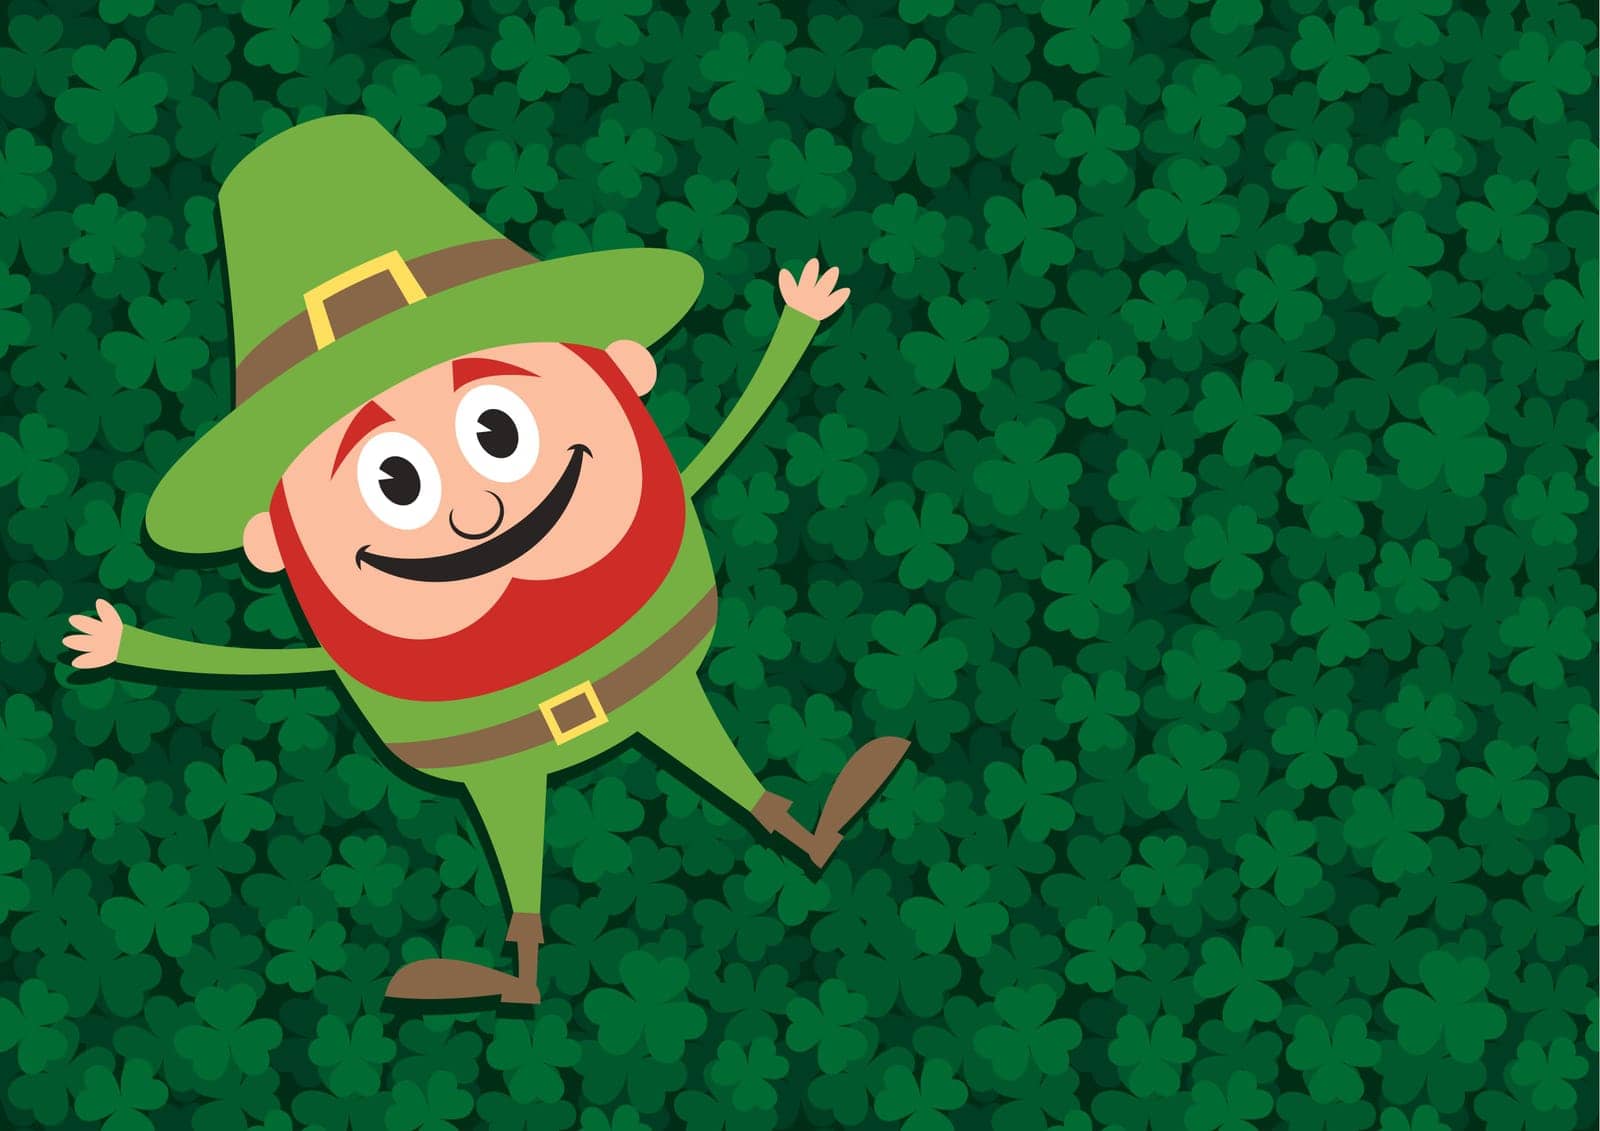 Illustration of happy leprechaun lying down on clover meadow. The meadow itself is seamless pattern.